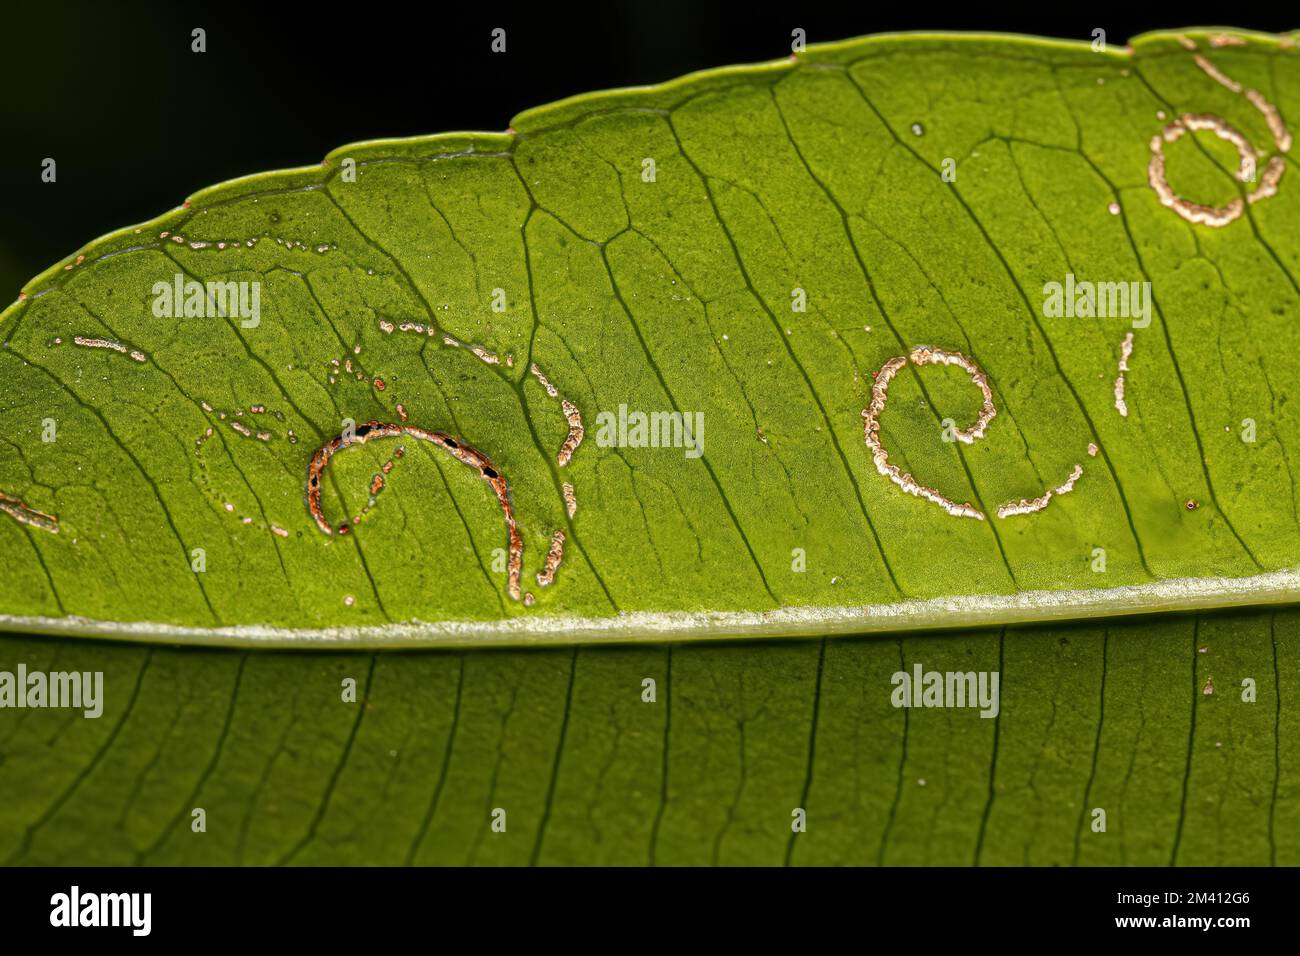 Mombins Tree Leaves of the Genus Spondias with damage by White Flies Insects of the Family Aleyrodidae Stock Photo